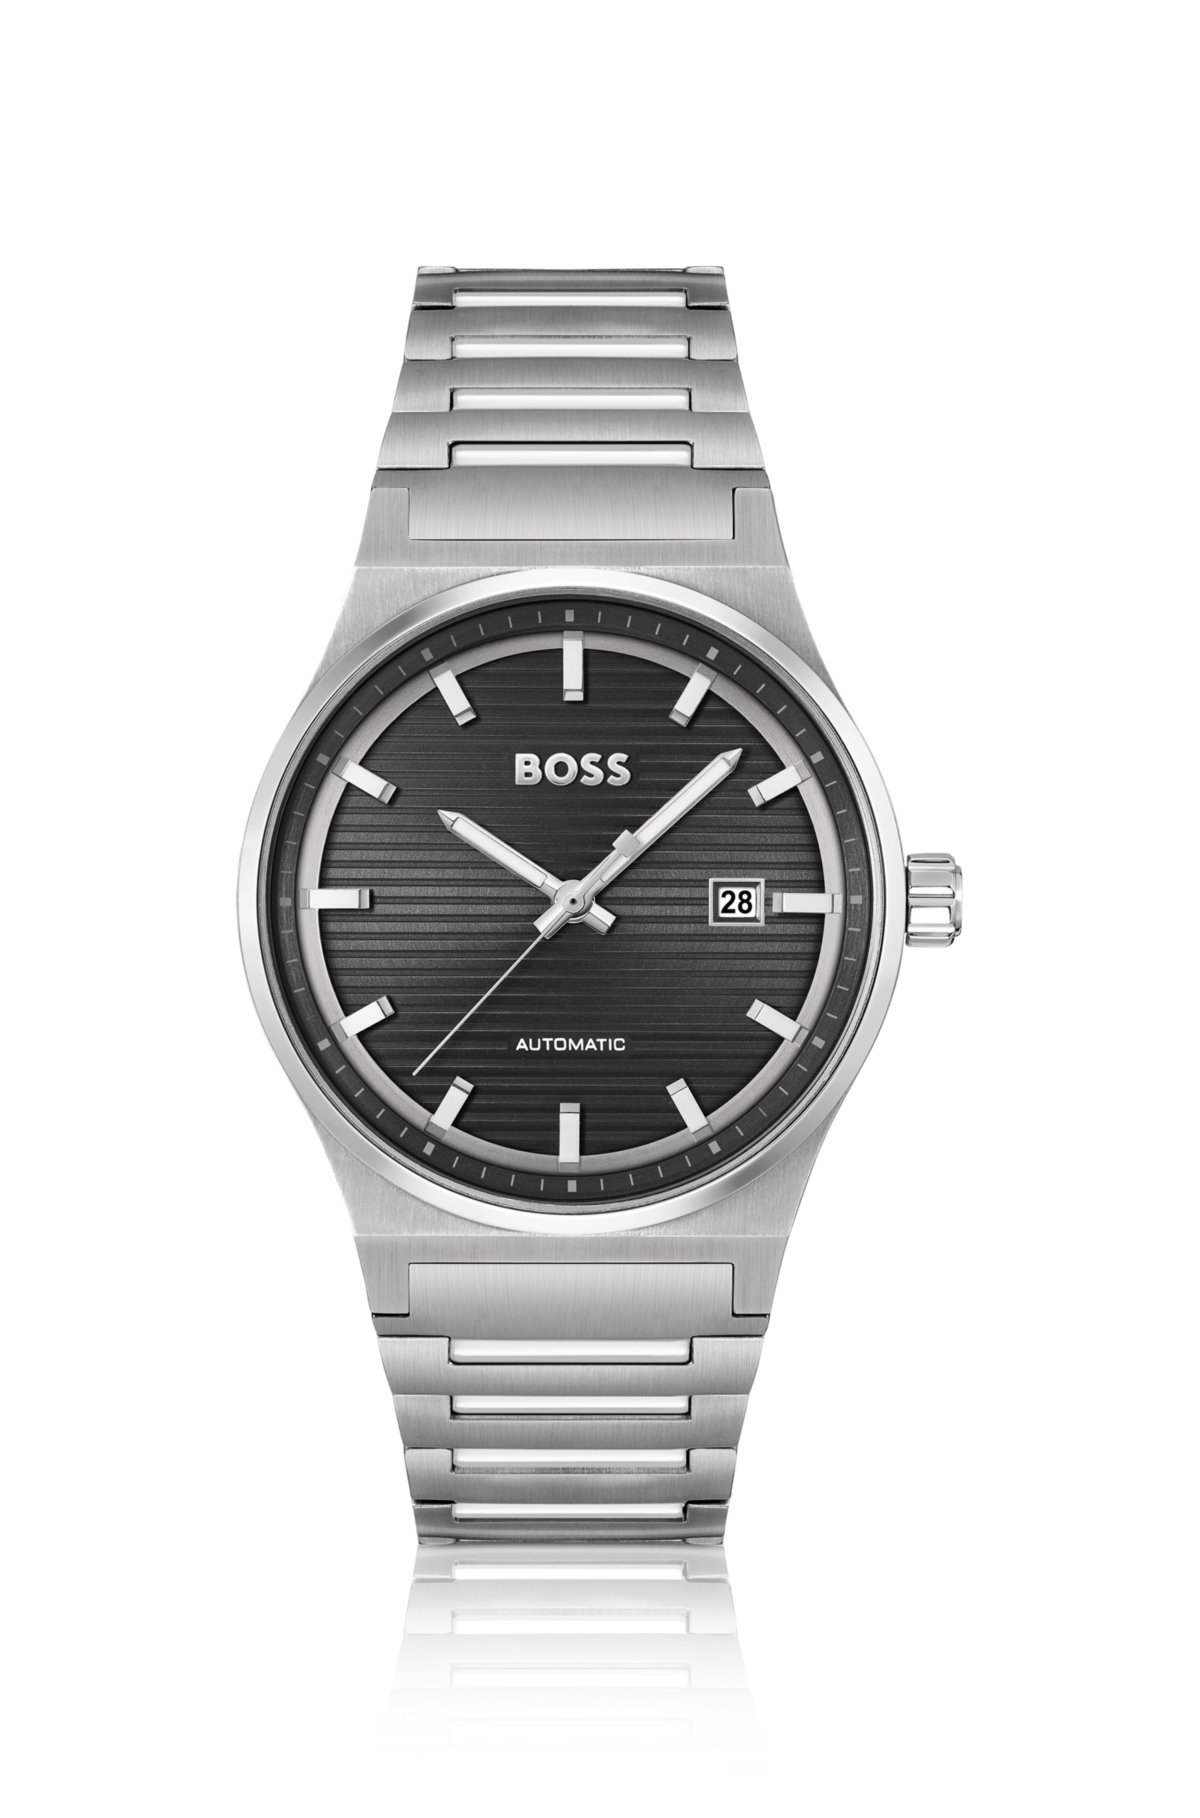 BOSS - Link-bracelet automatic watch with dial groove-textured